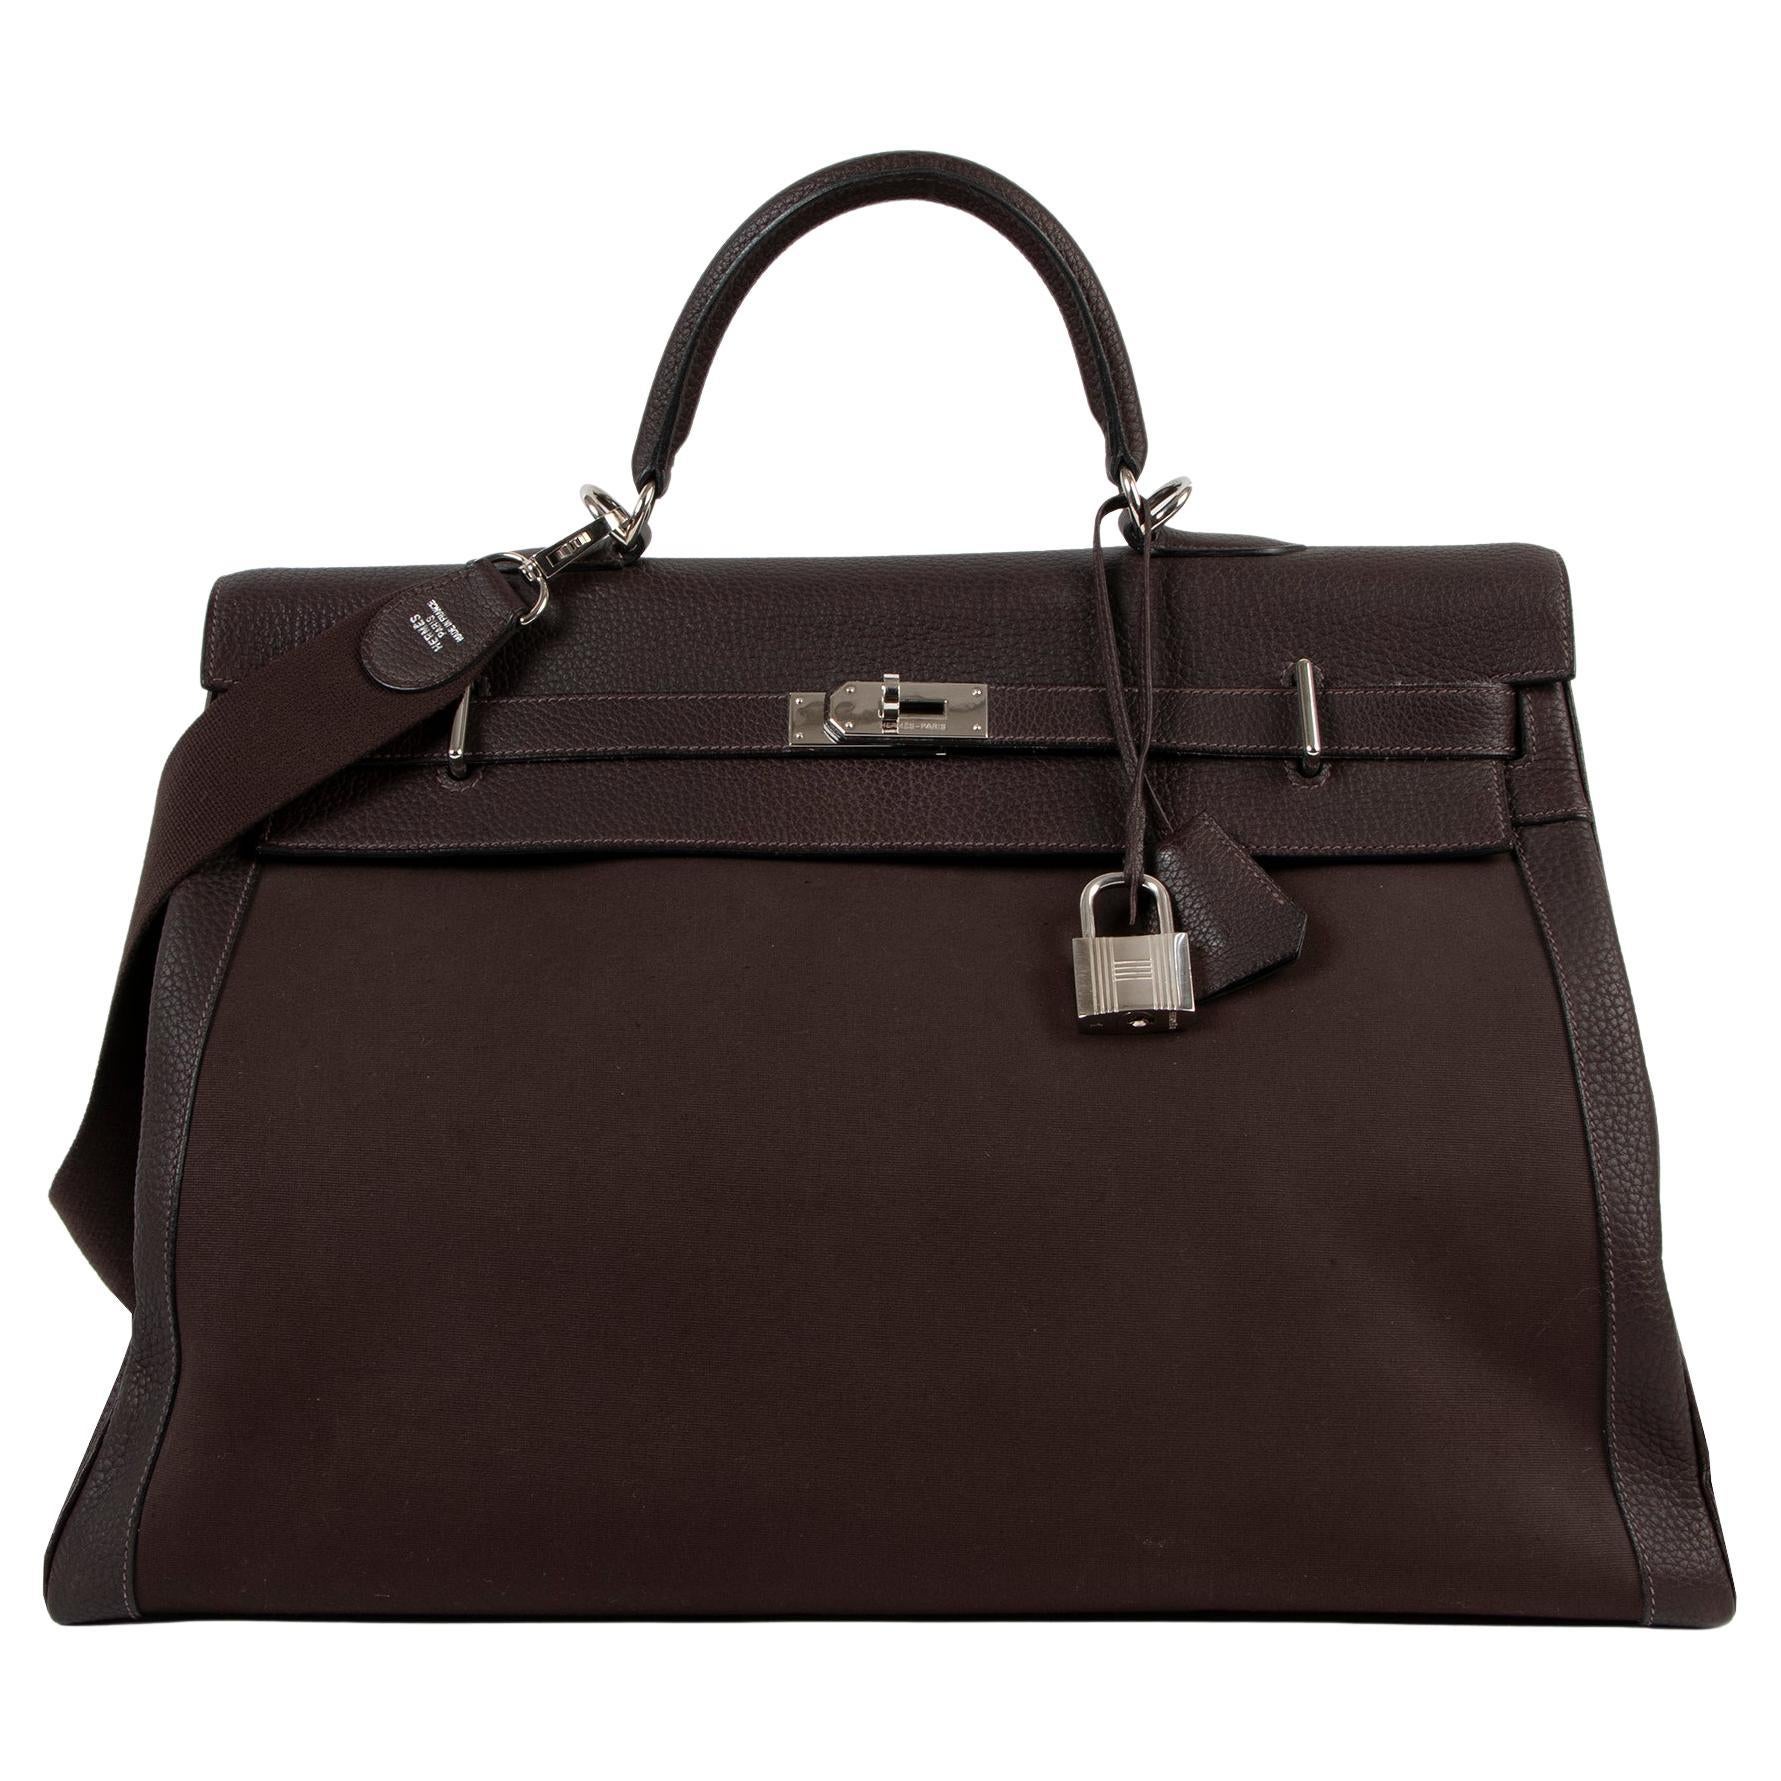 Hermès 50cm Travel Kelly With PHW For Sale at 1stDibs